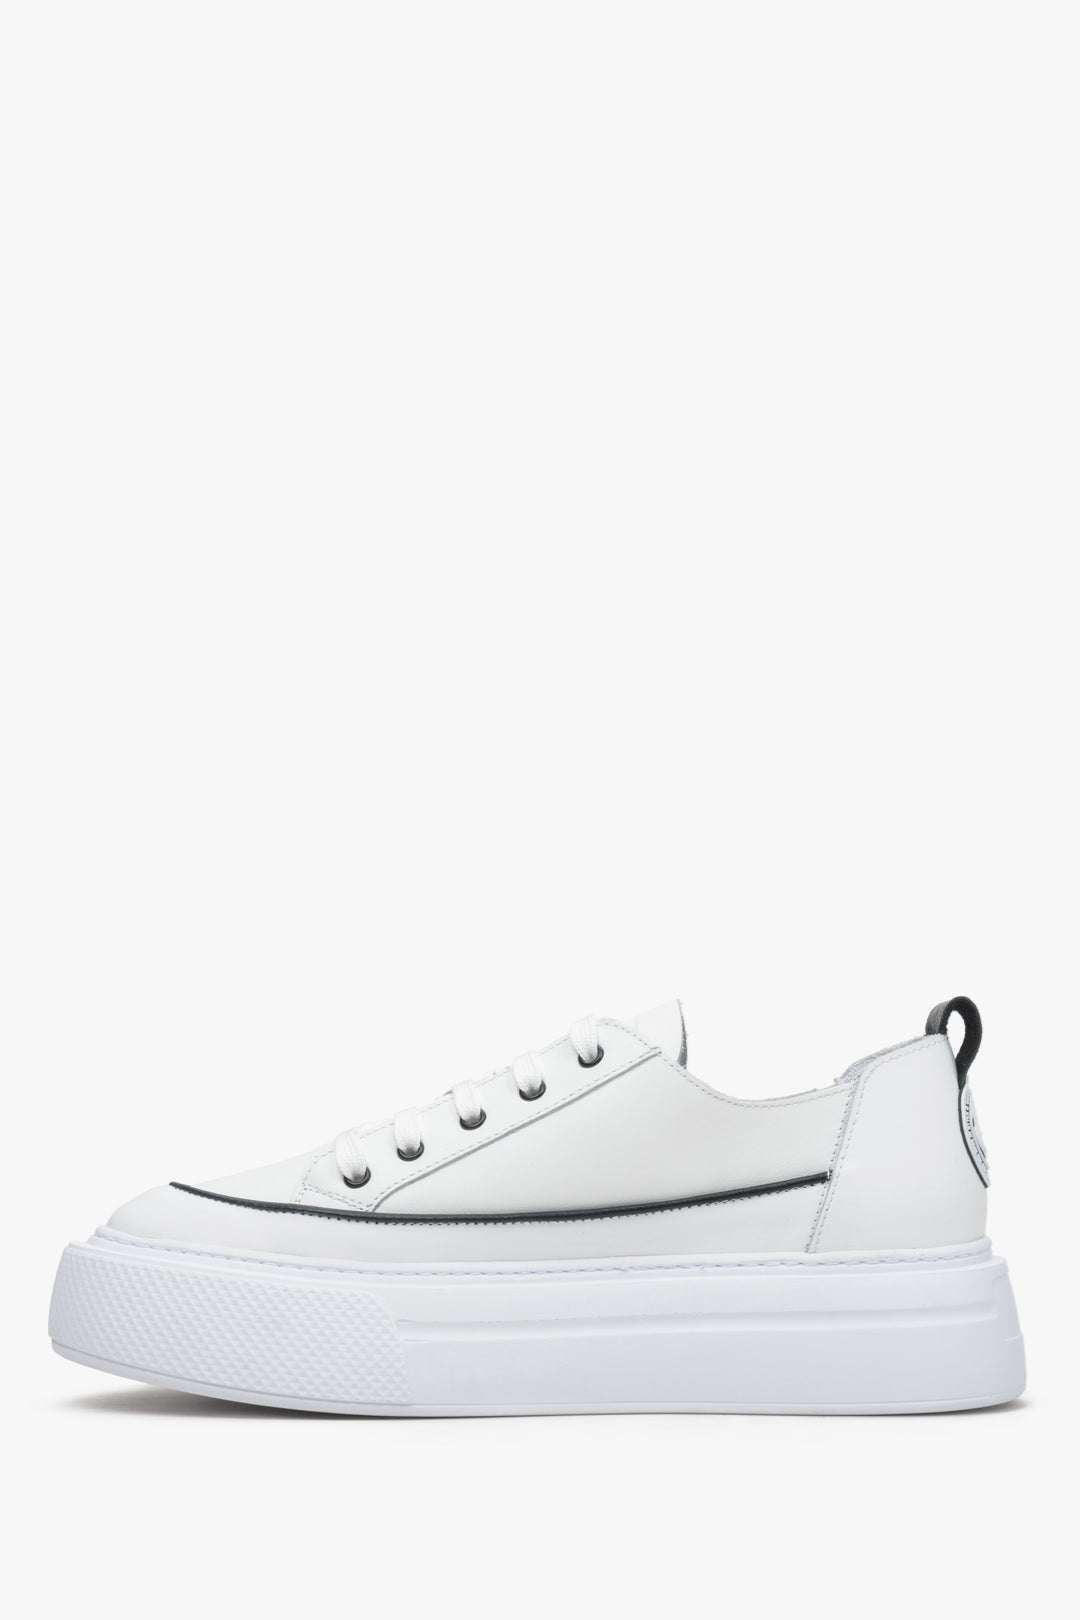 Women's white low top sneakers made of genuine leather - shoe profile.